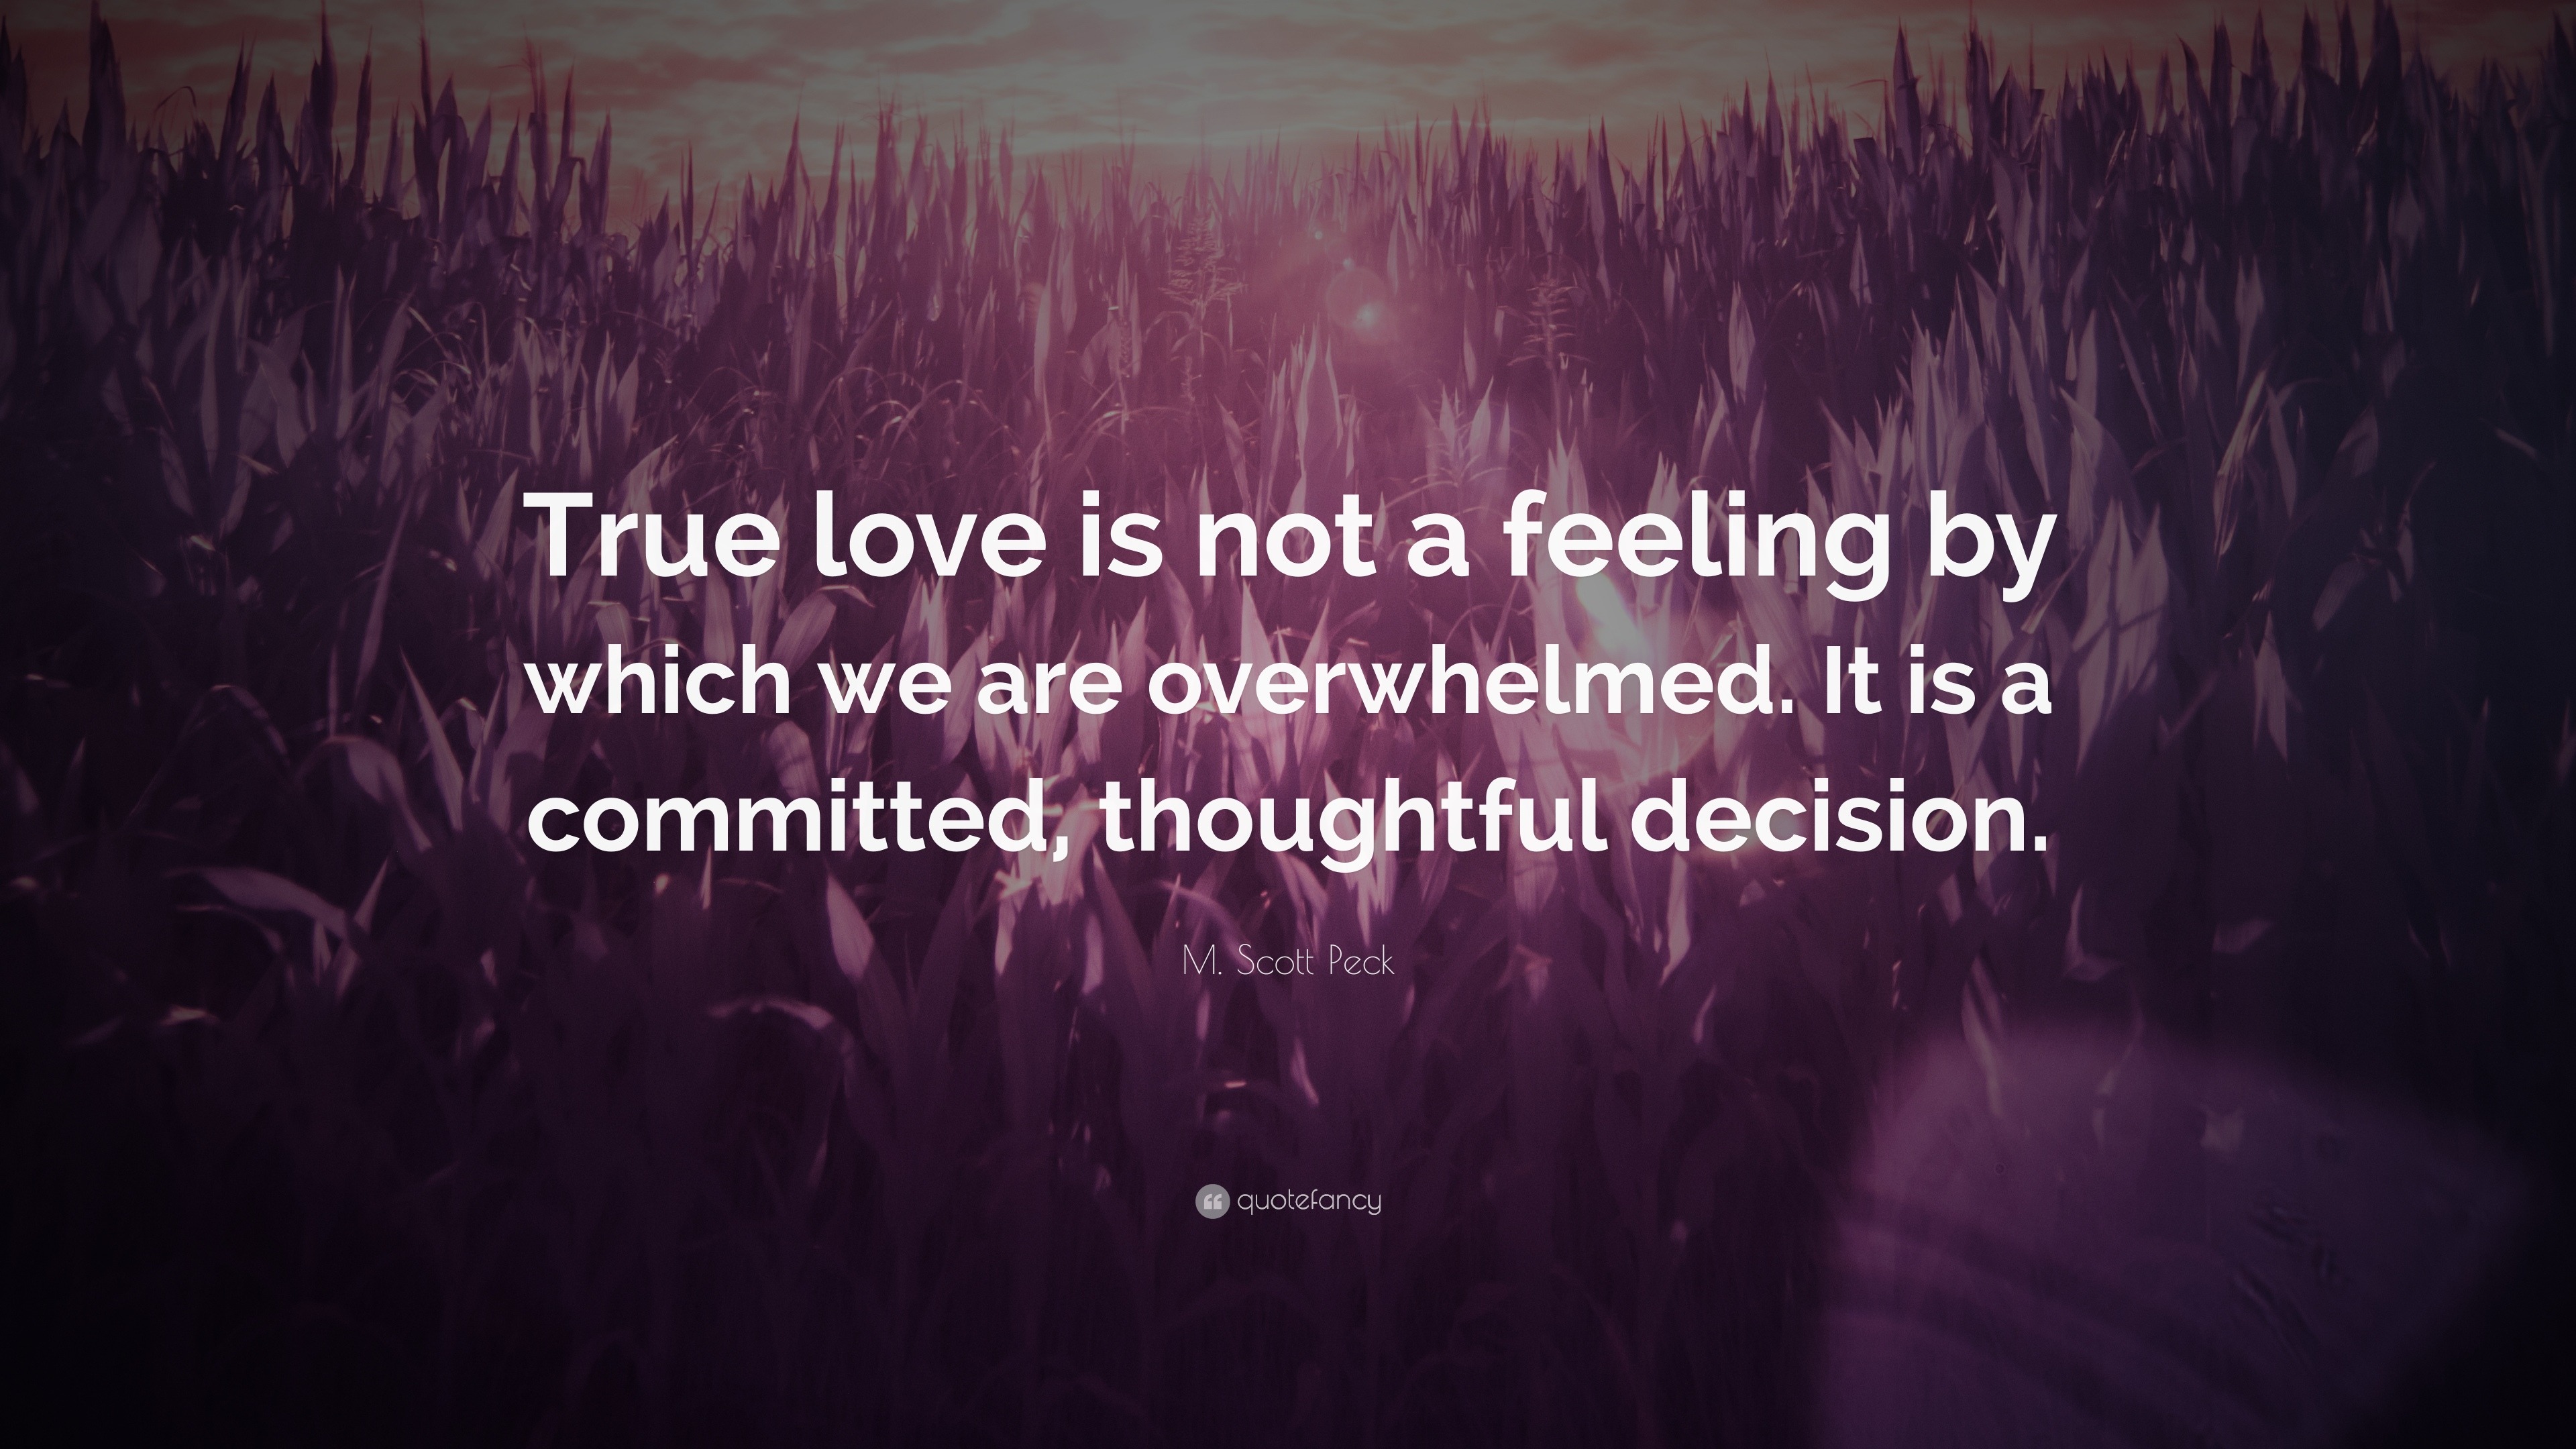 M Scott Peck Quote “True love is not a feeling by which we